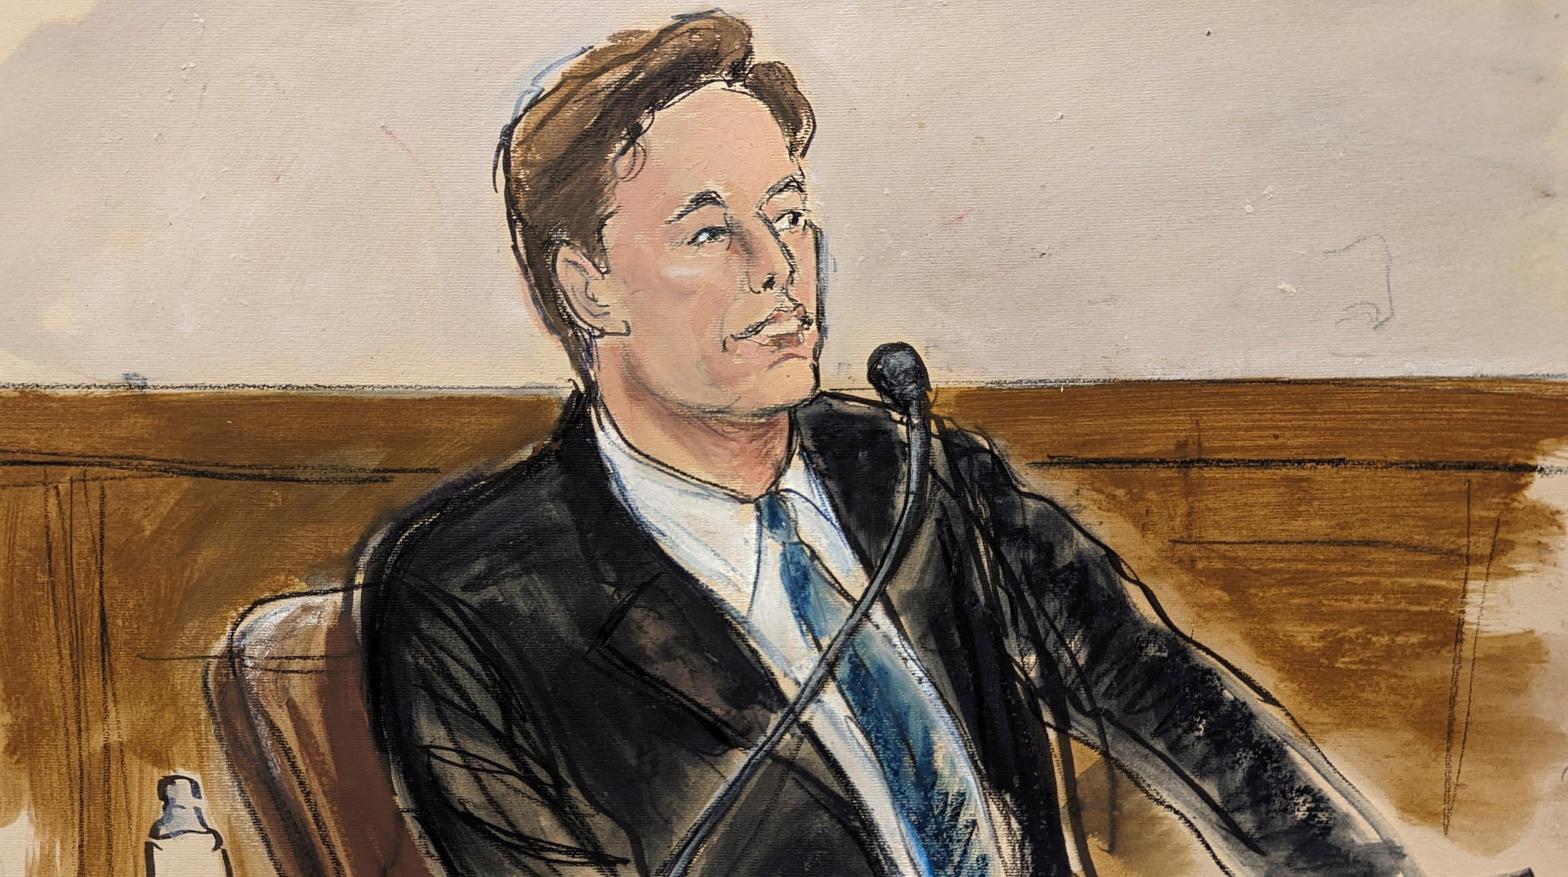 A courtroom sketch of Elon Musk as he worked to defend his $US56 ($78) billion pay package he received from Tesla back in 2018. (Illustration: Elizabeth Williams, AP)